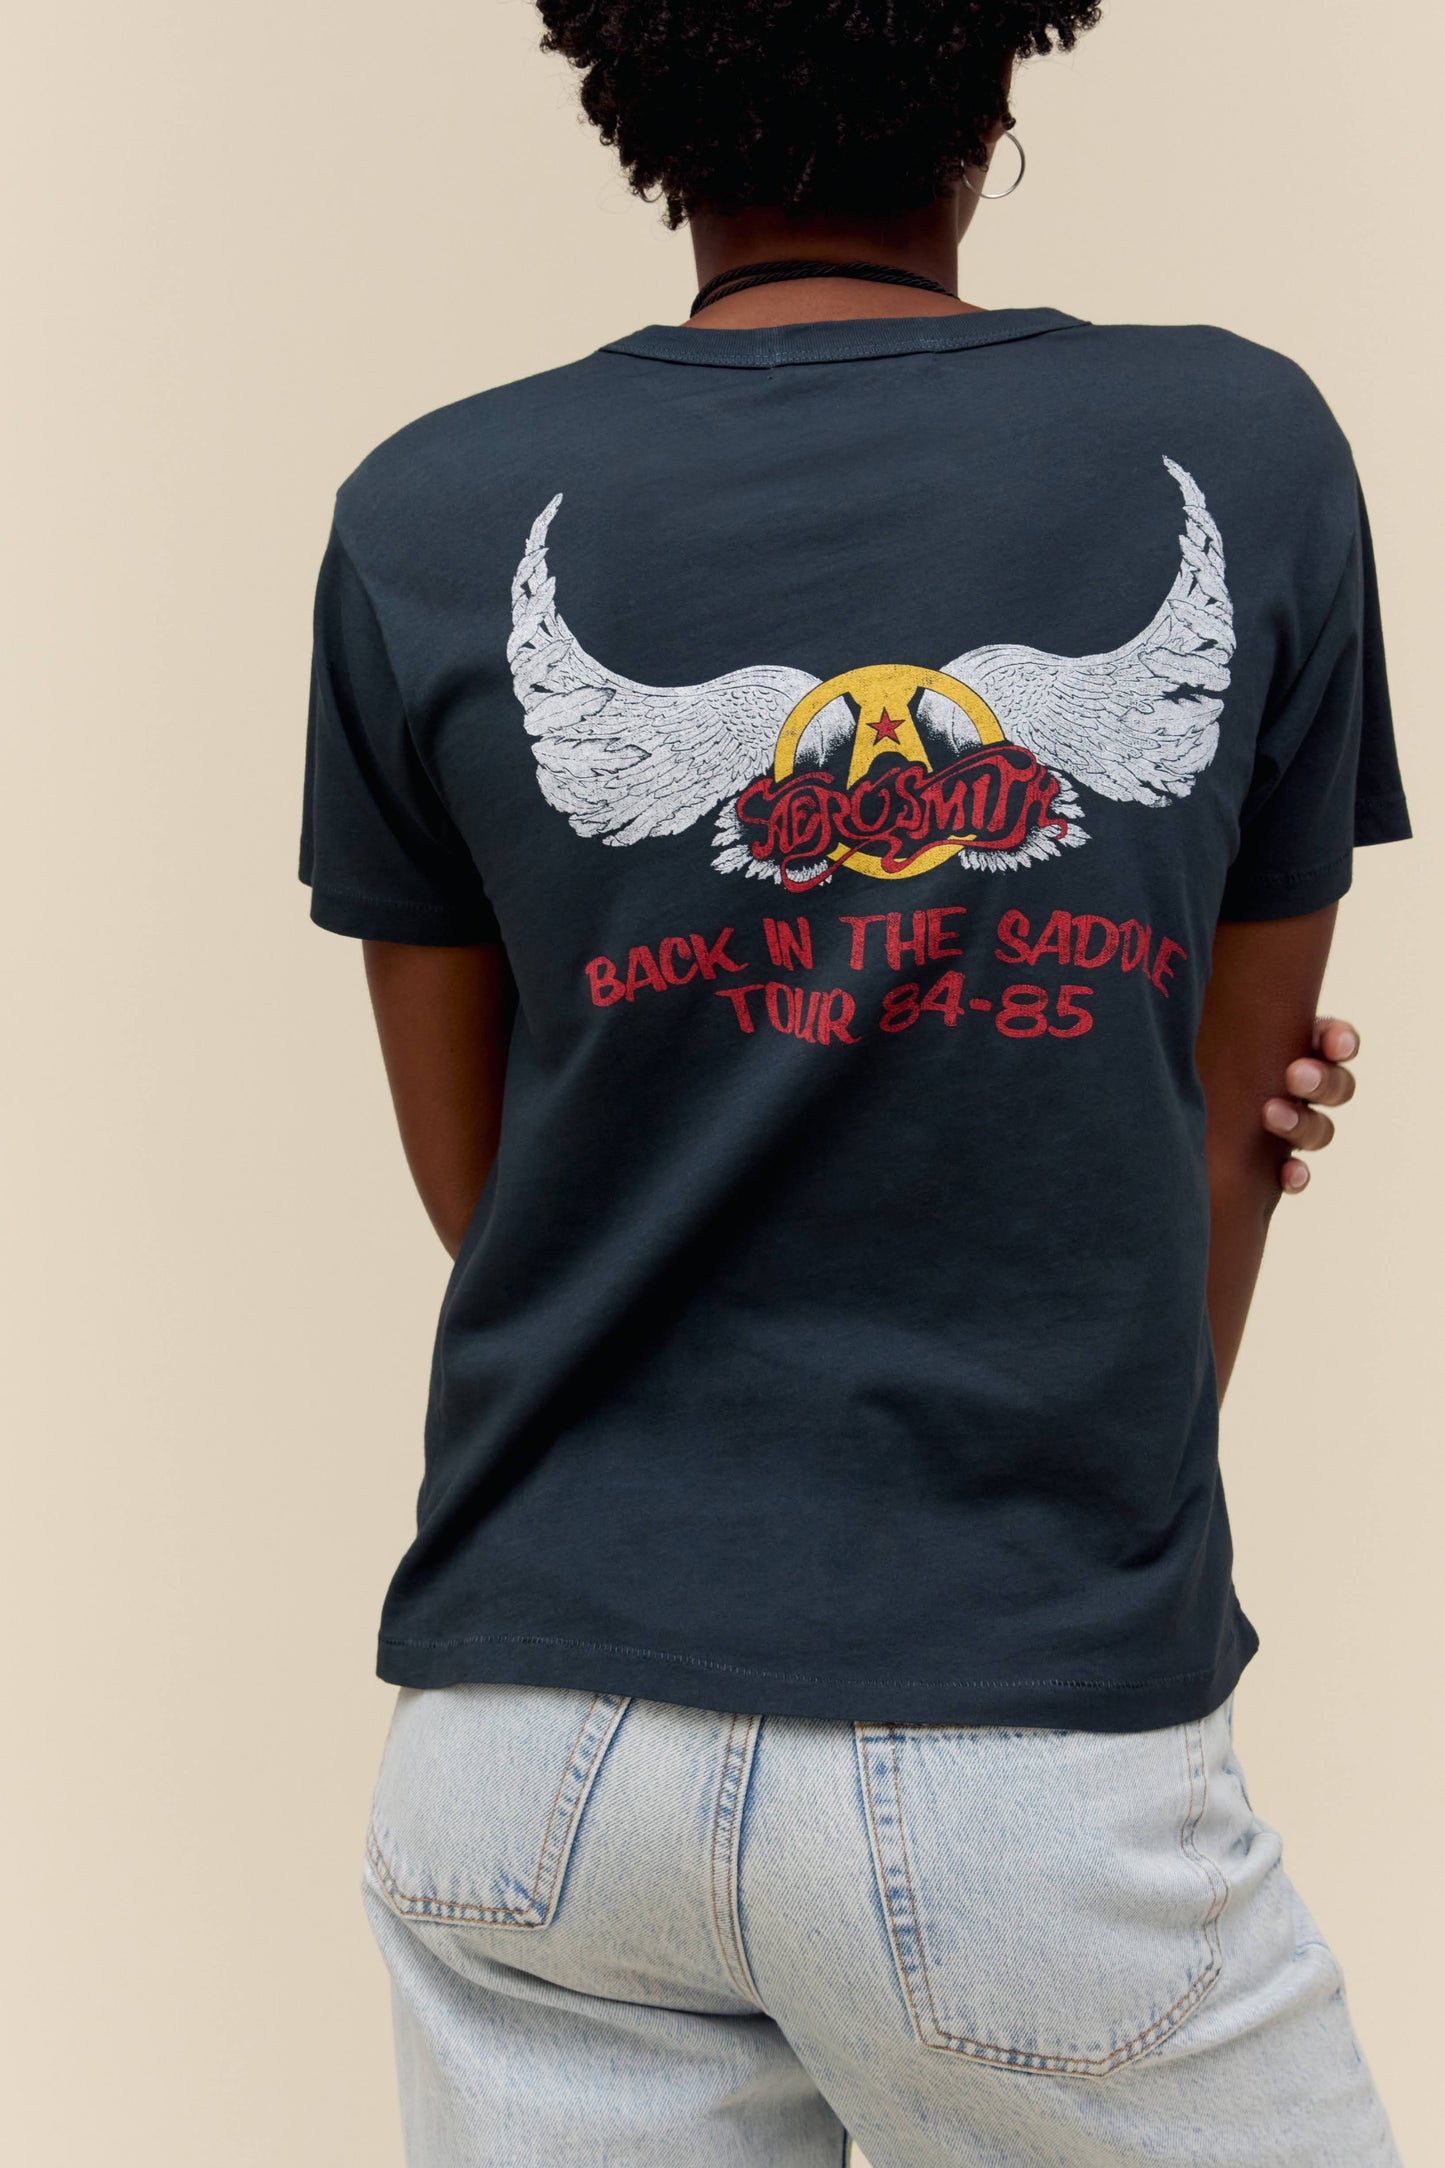 A model featuring a black tee stamped with Aerosmith and a photo of the band in the middle.